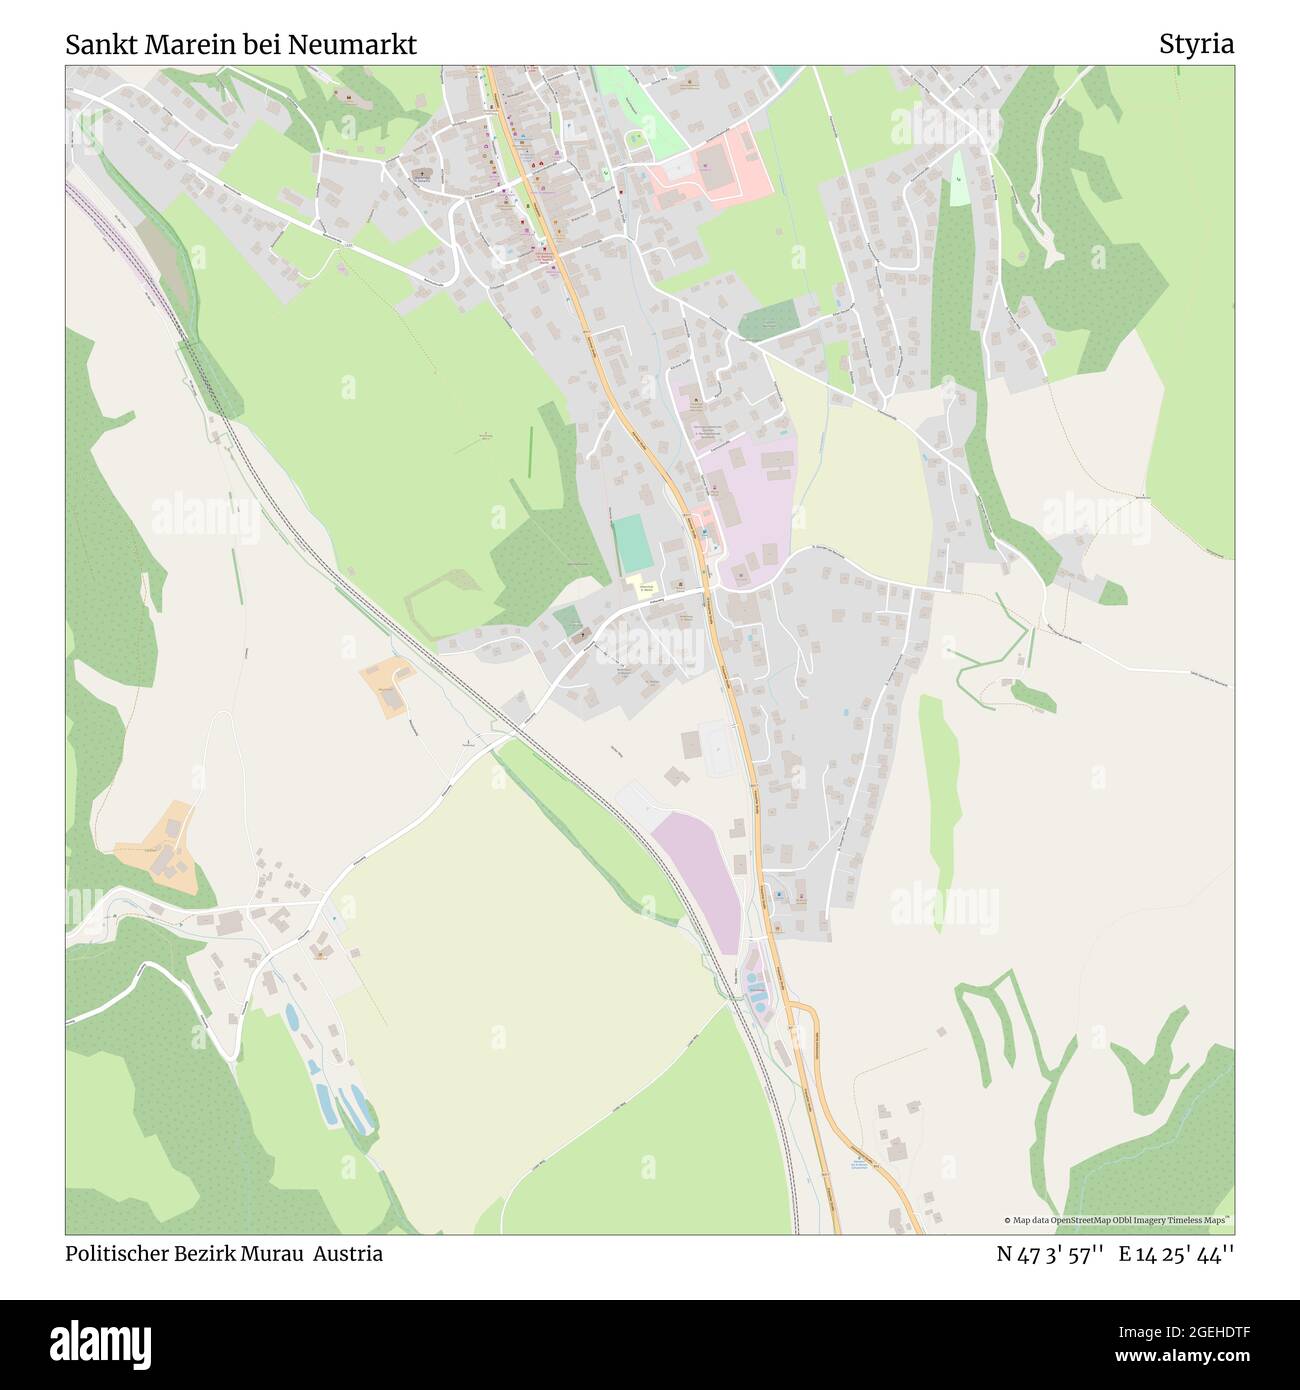 Sankt Marein bei Neumarkt, Politischer Bezirk Murau, Austria, Styria, N 47 3' 57'', E 14 25' 44'', map, Timeless Map published in 2021. Travelers, explorers and adventurers like Florence Nightingale, David Livingstone, Ernest Shackleton, Lewis and Clark and Sherlock Holmes relied on maps to plan travels to the world's most remote corners, Timeless Maps is mapping most locations on the globe, showing the achievement of great dreams Stock Photo